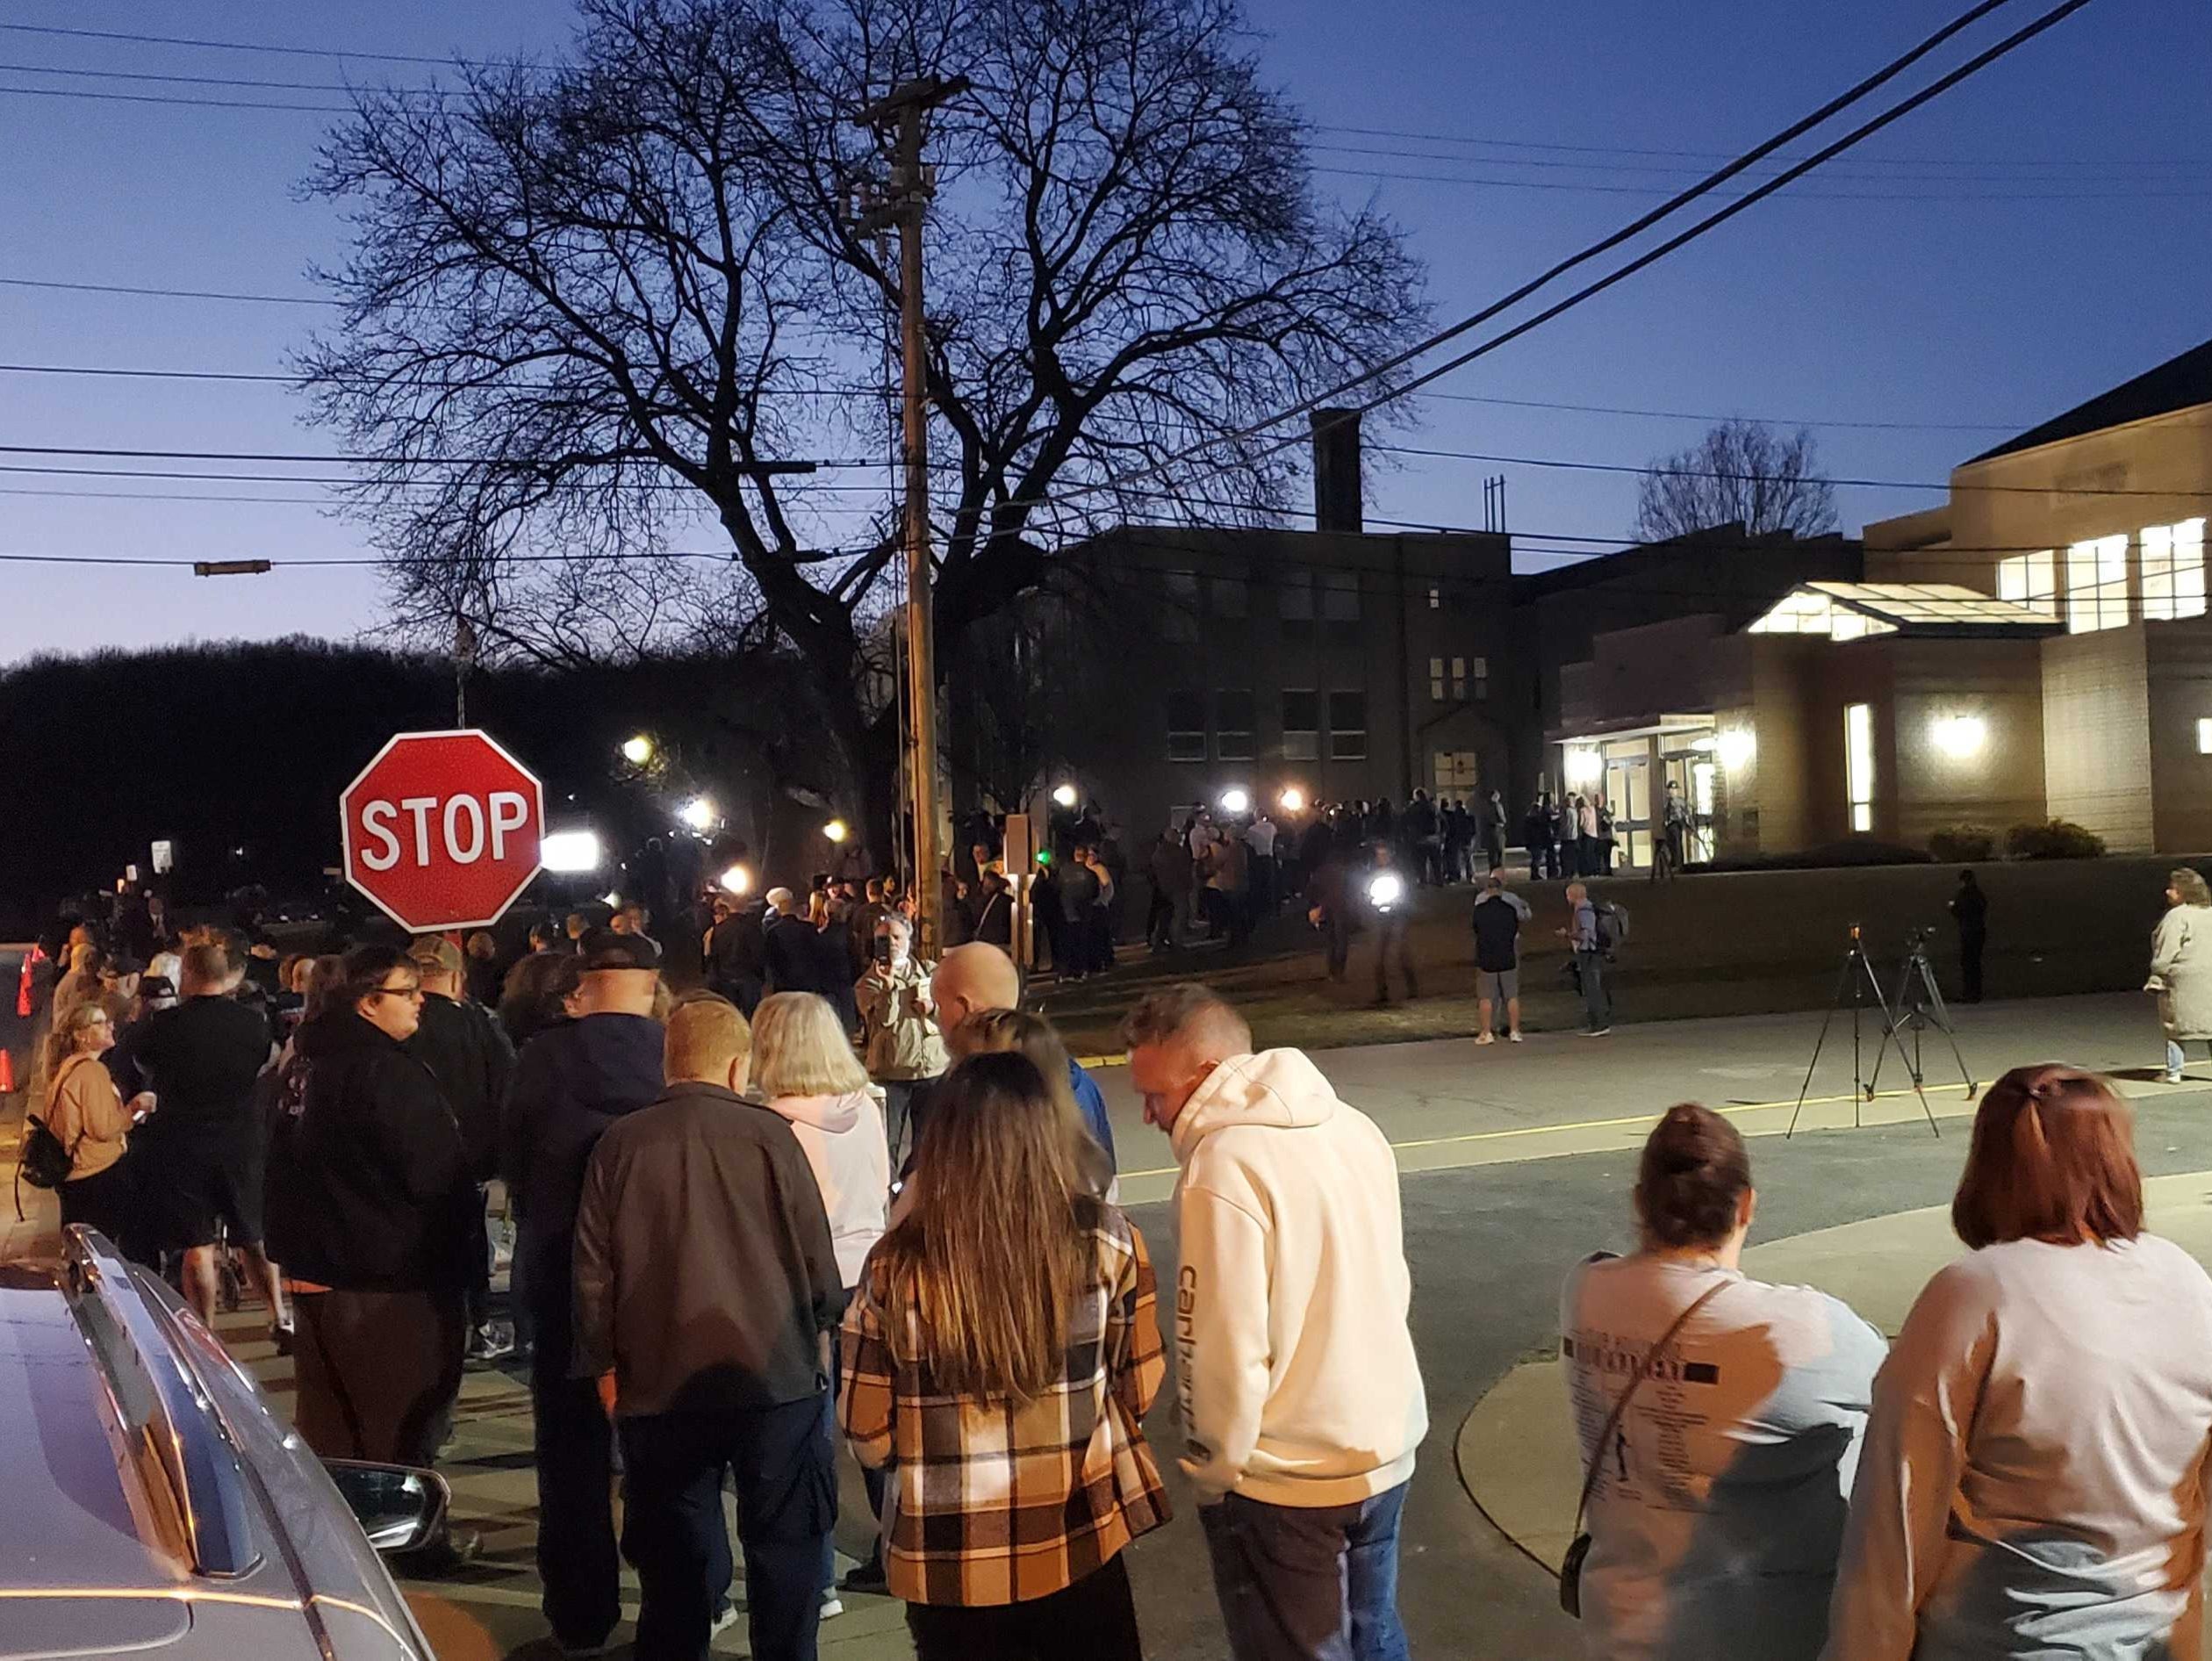 A line of East Palestine residents wait in a line outside the village’s high school, hoping for answers in the wake of a Norfolk Southern train derailment